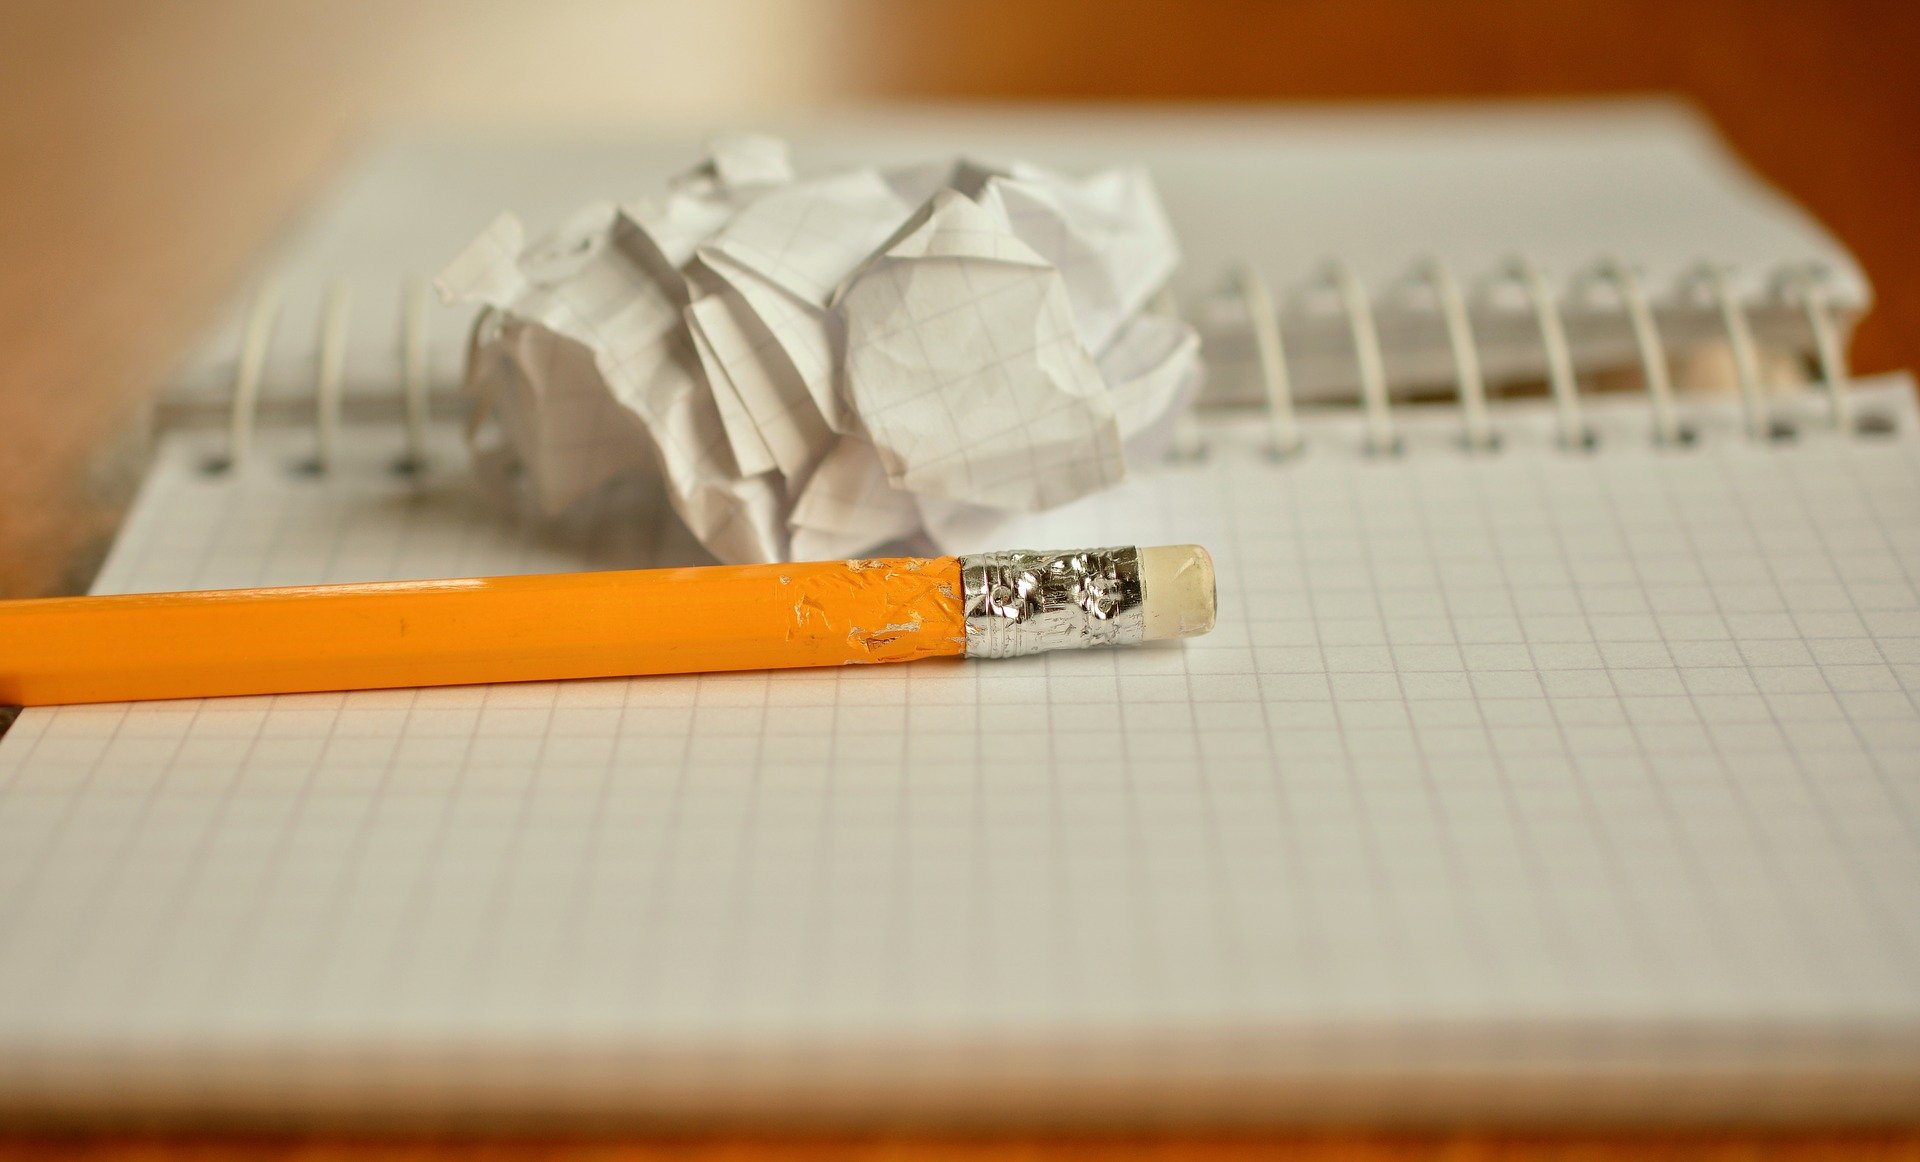 A pencil and a crumpled piece of notebook paper, representing three toxic leadership habits we should relegate to the dustbin.